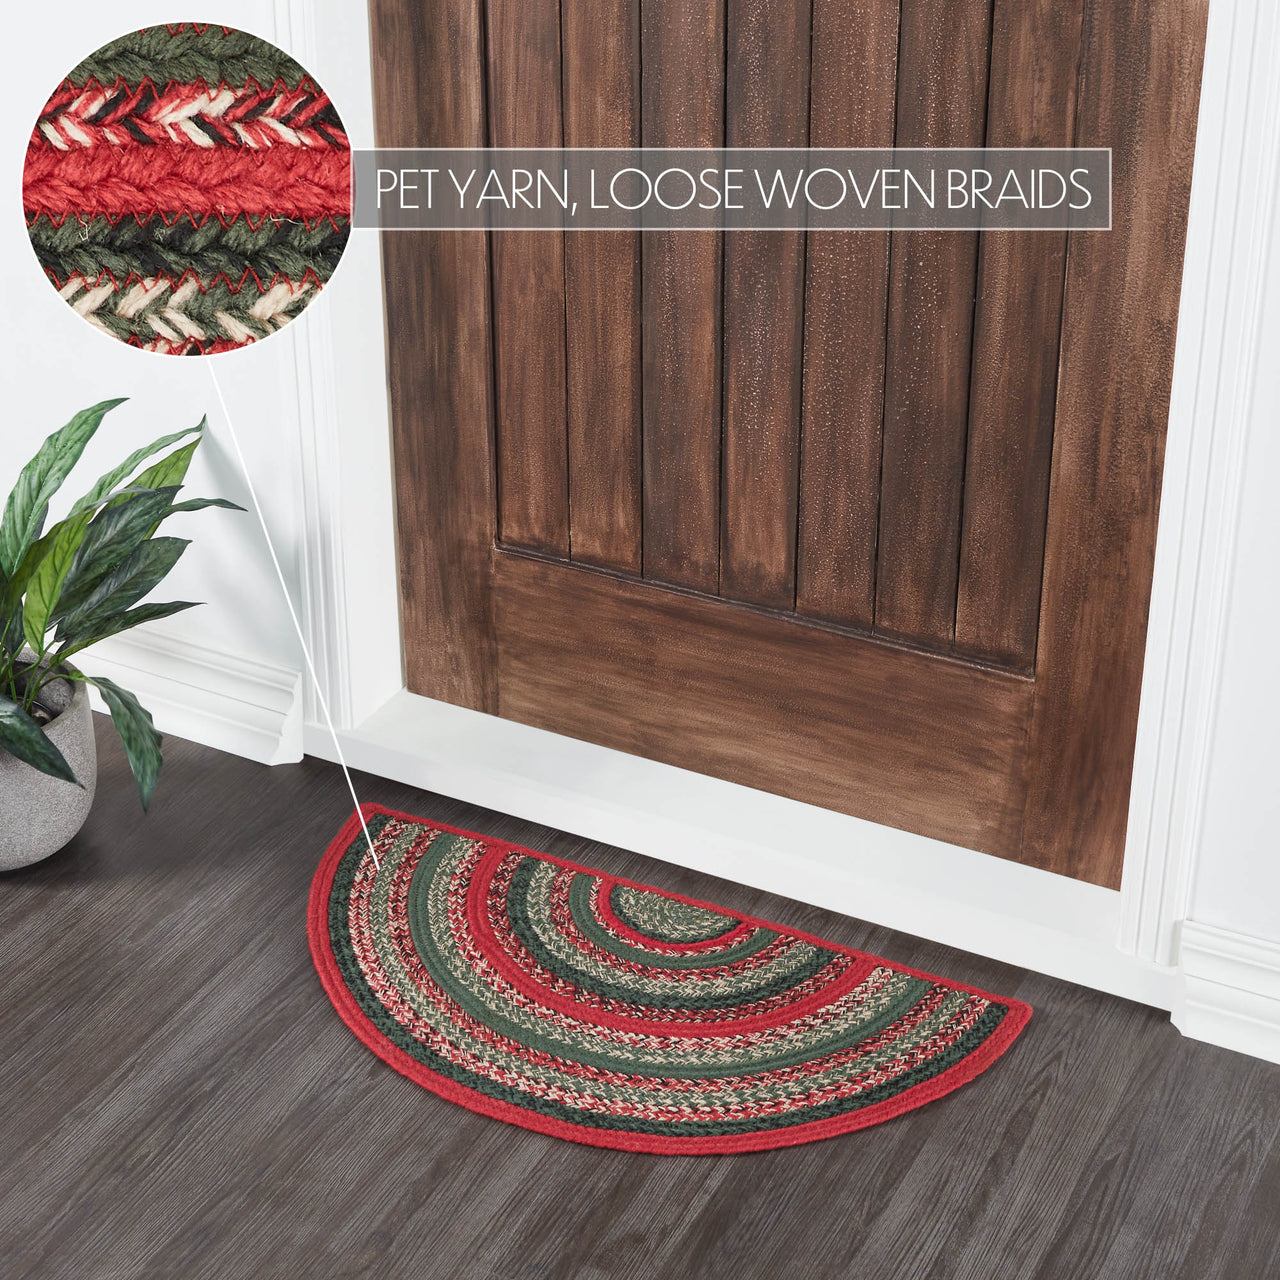 Forrester Indoor/Outdoor Braided Rug Half Circle 16.5"x33" VHC Brands